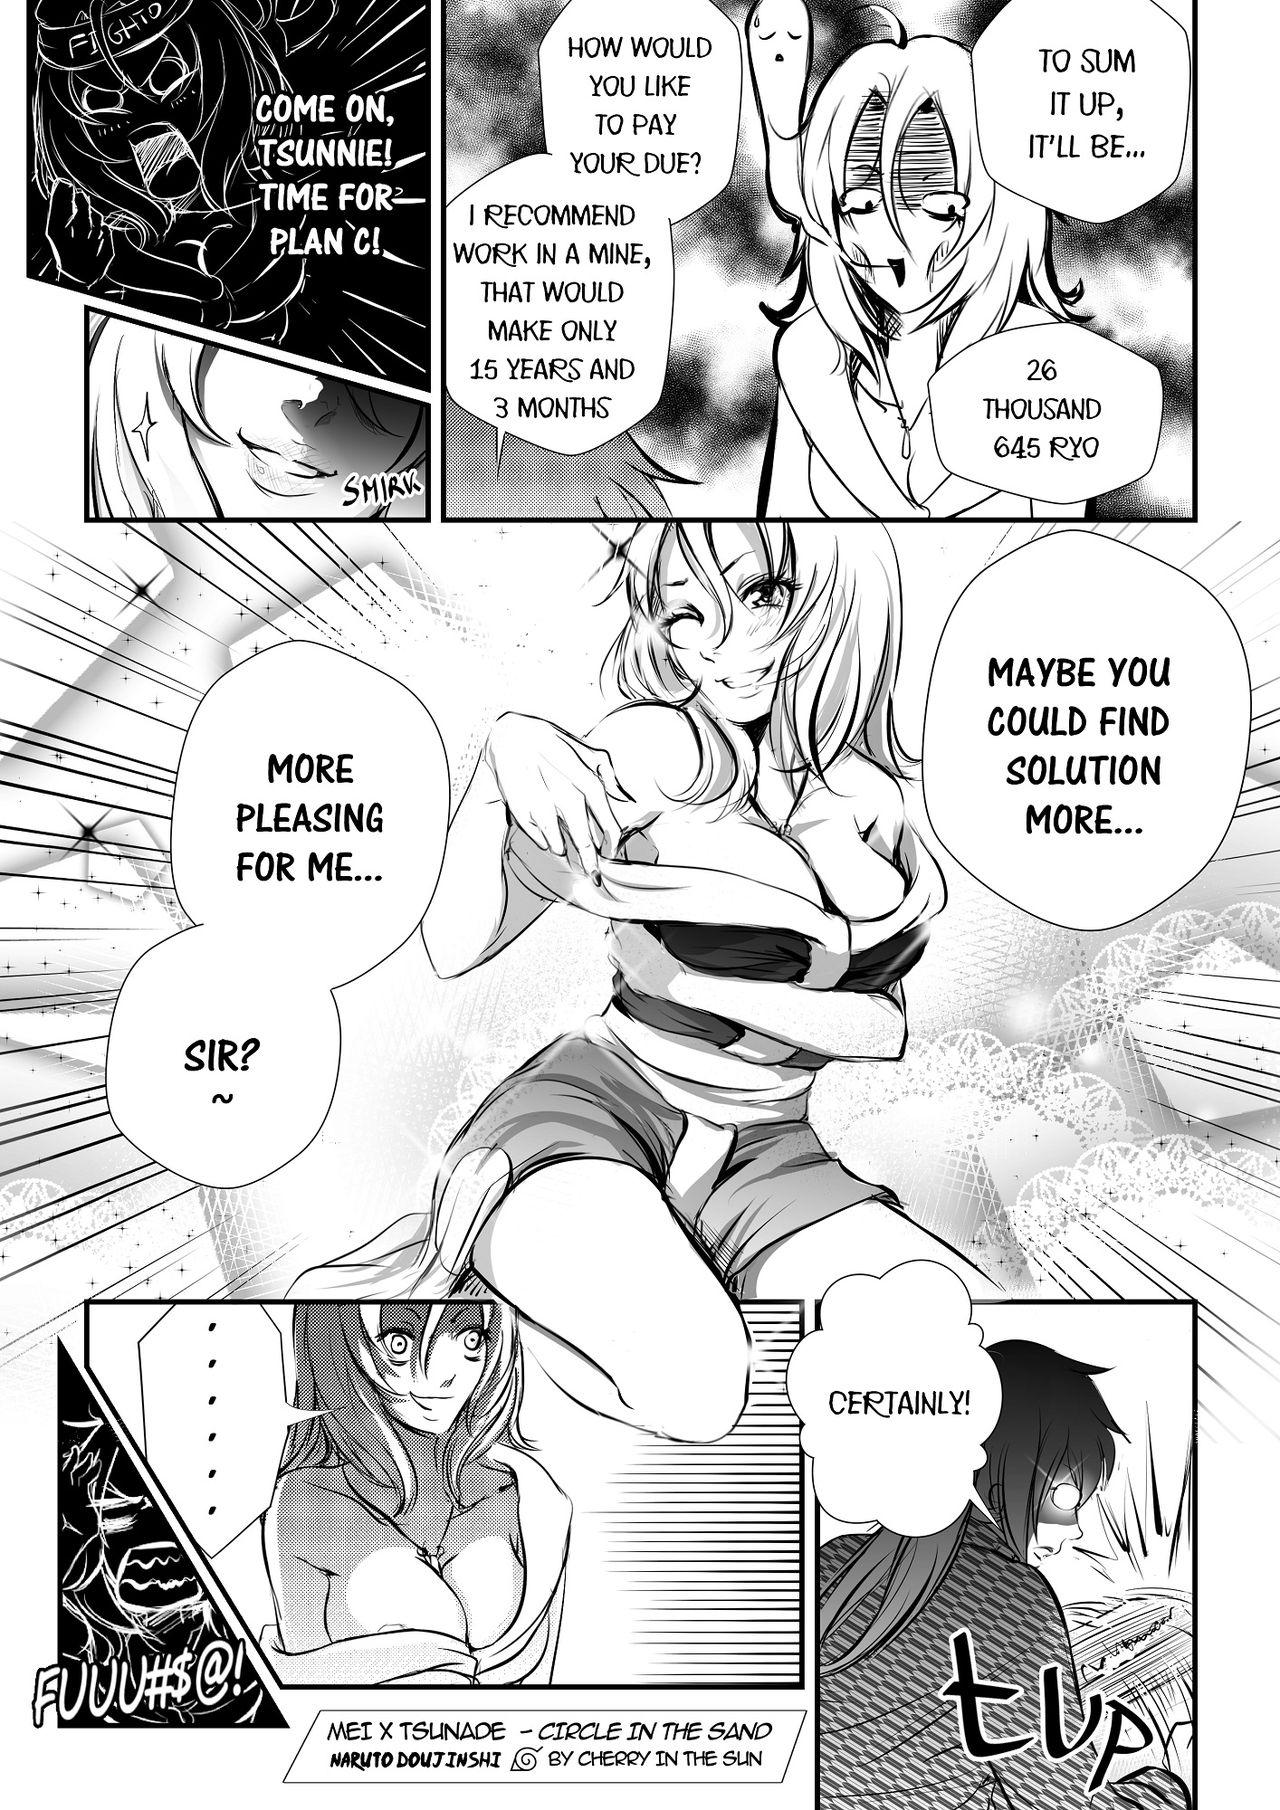 Hot Girls Getting Fucked Circle in the Sand - Naruto Adolescente - Page 12